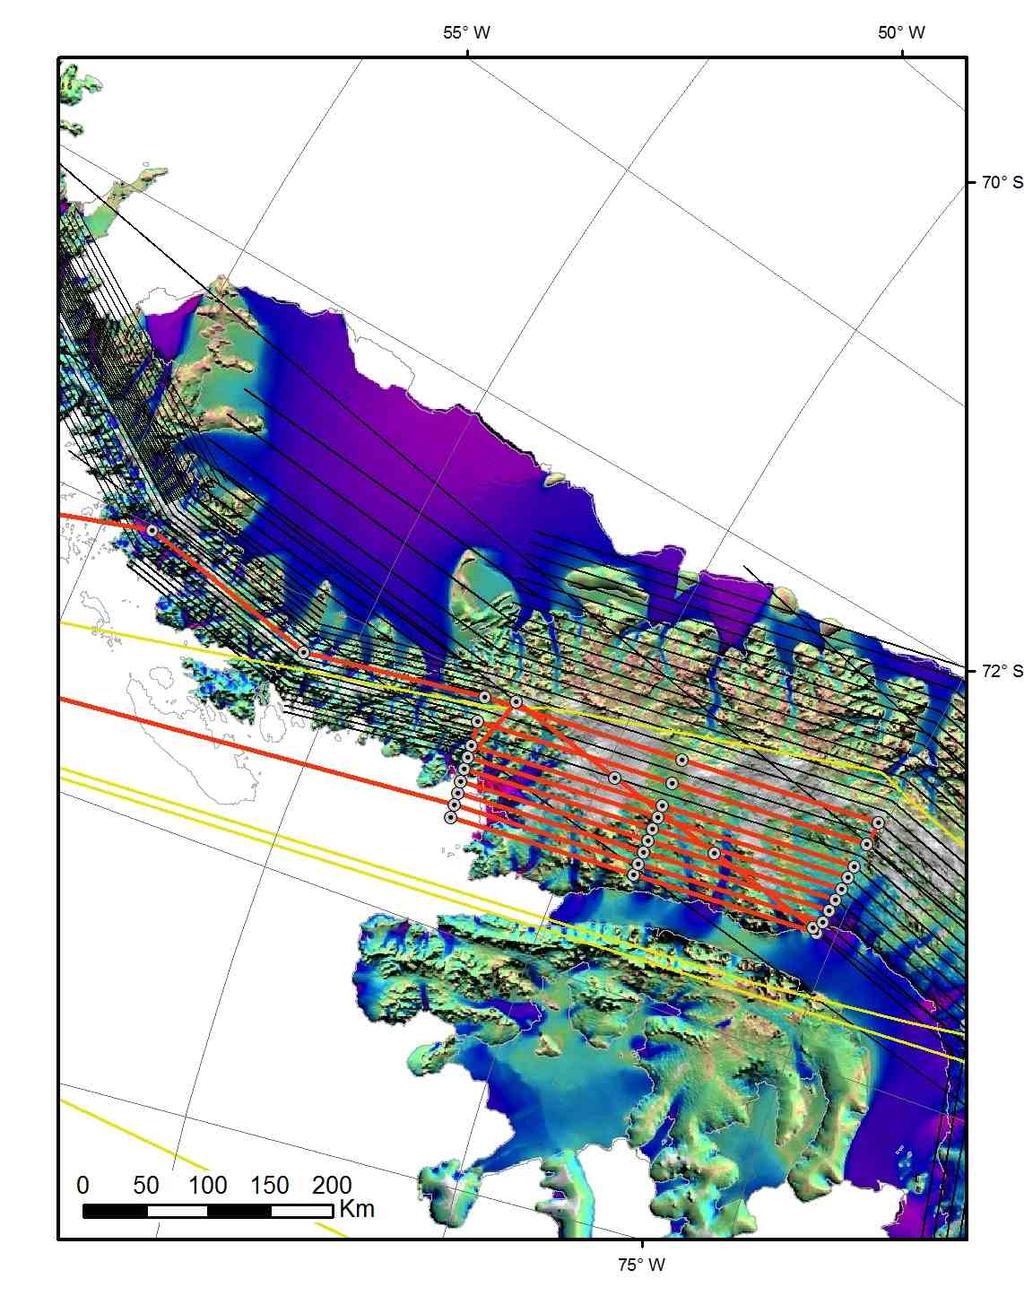 LVIS 2012 Antarctica Mapping Lines 7/13/12 9 Dyer: Priority 4 Flight: W Dyer Within P4 Area: High?